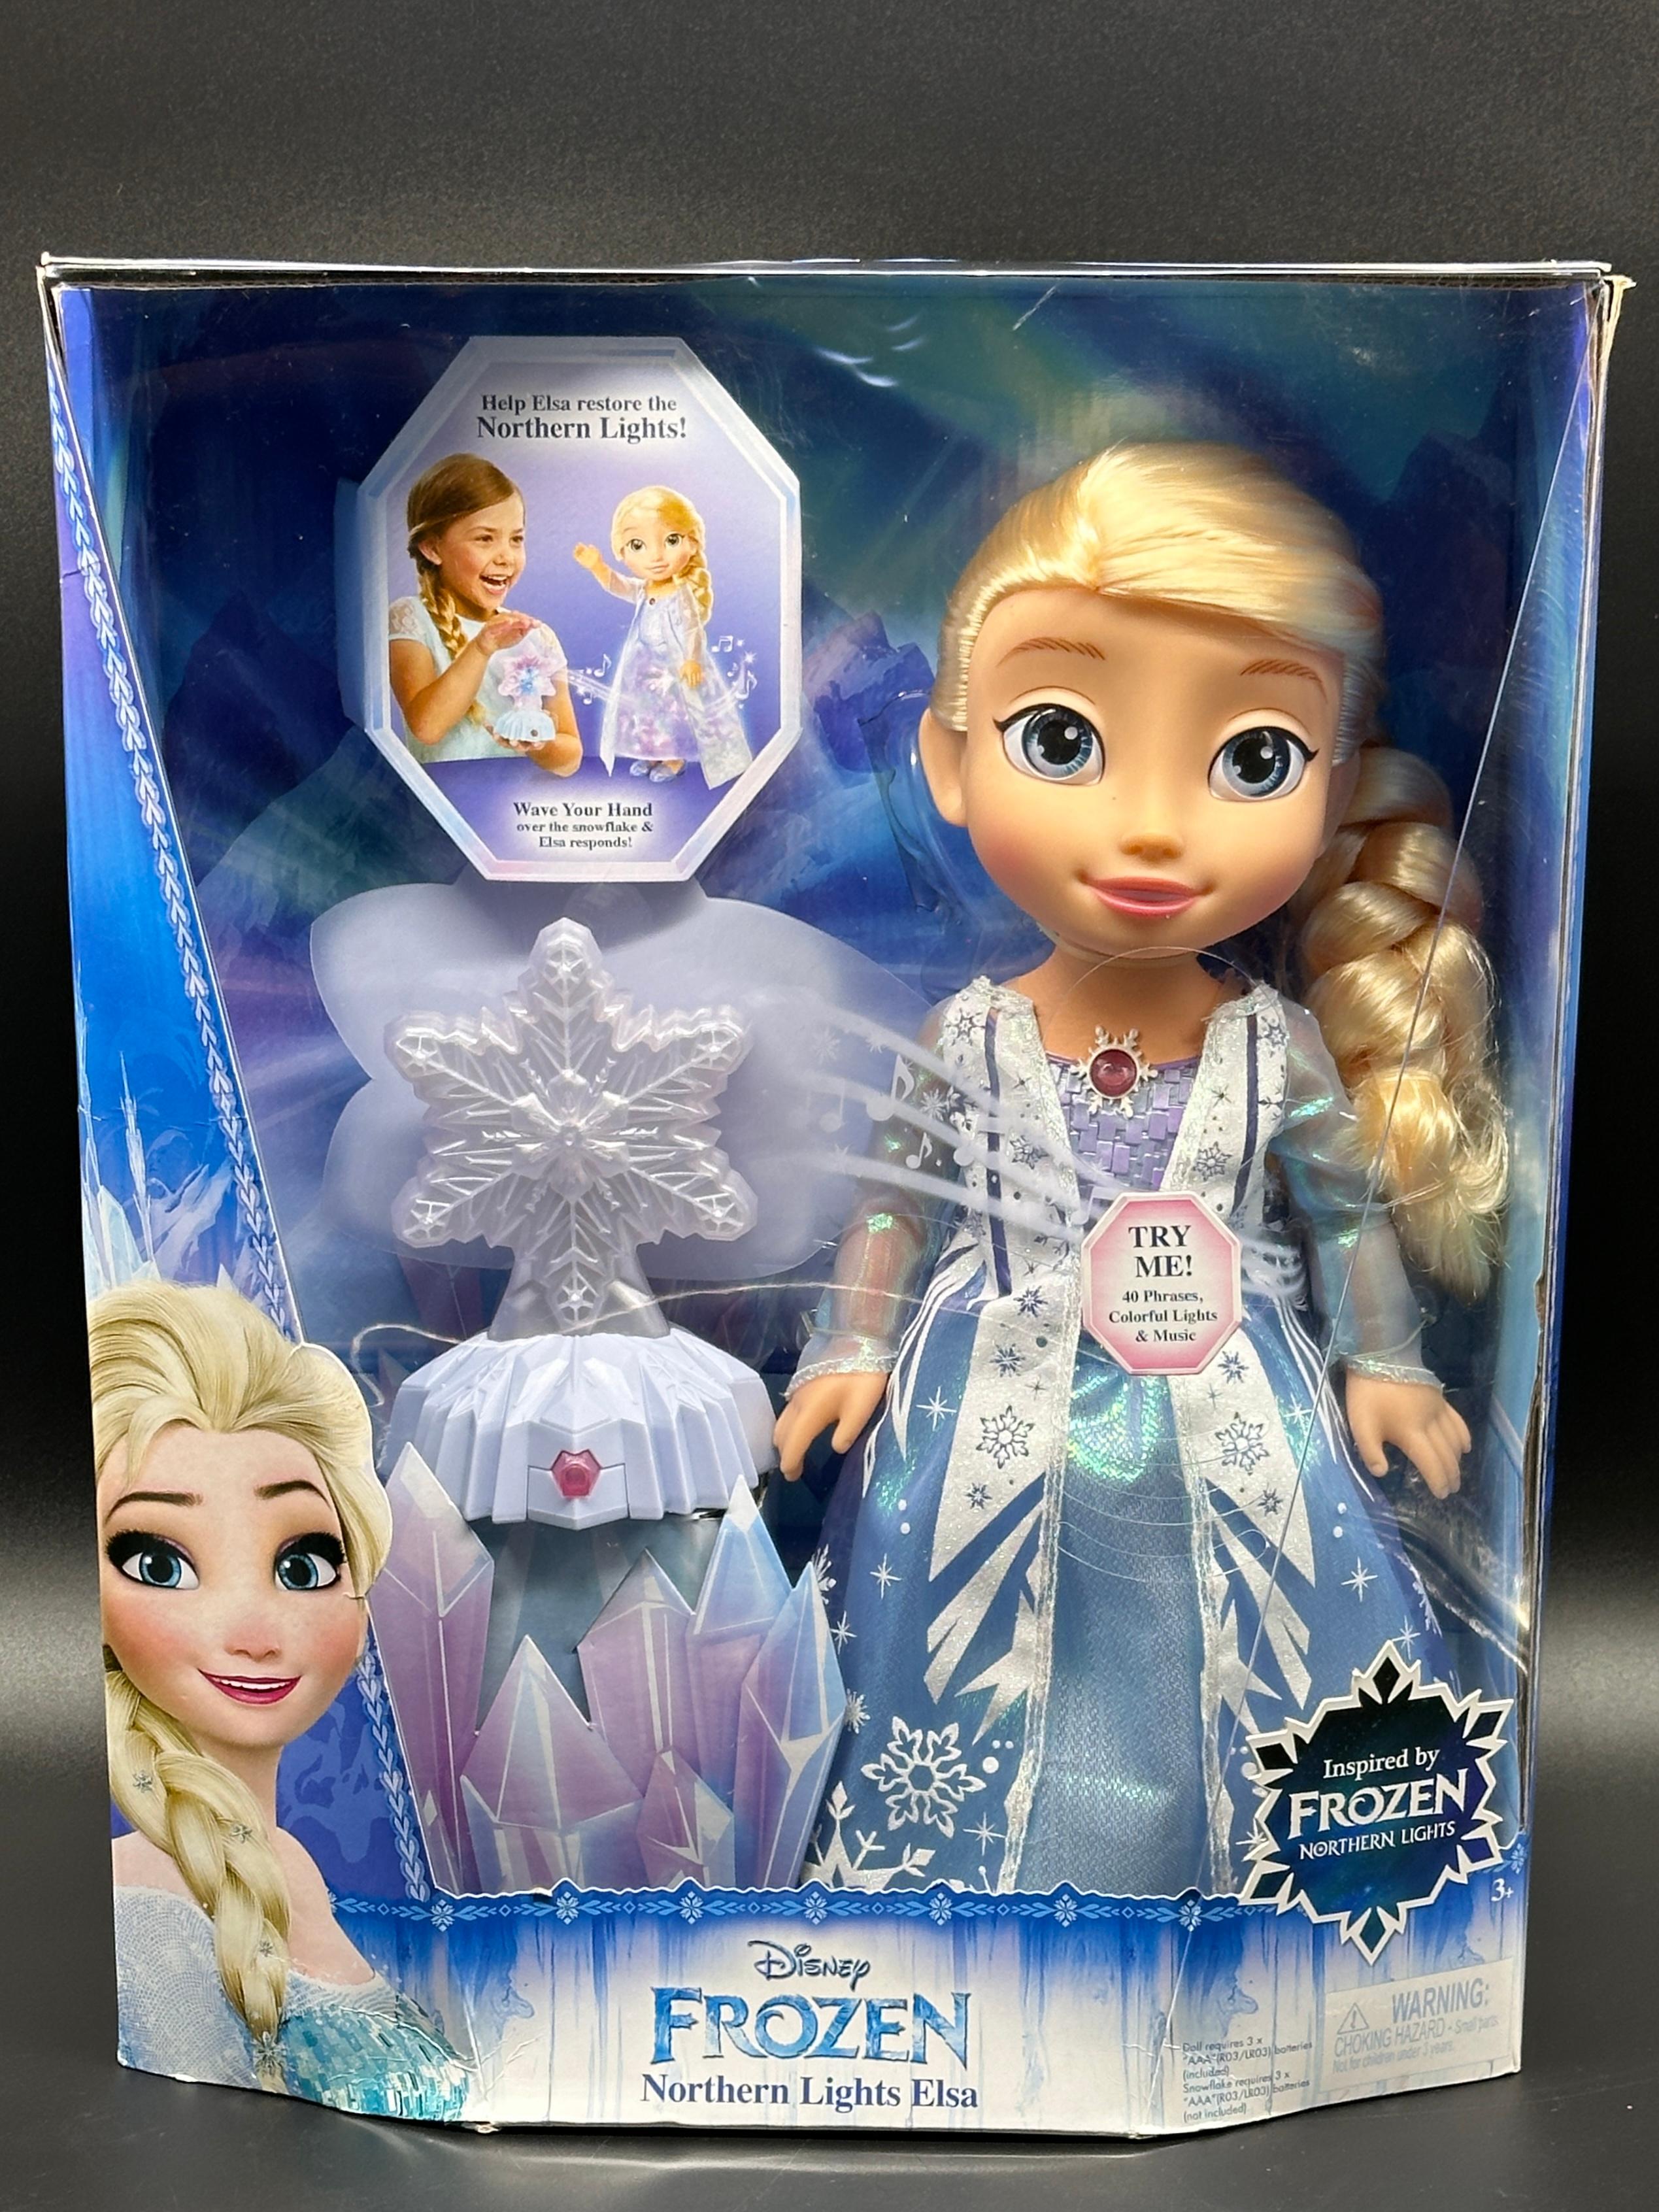 Disney's Frozen Singing Elsa and Olaf-A-Lot Dolls in Package